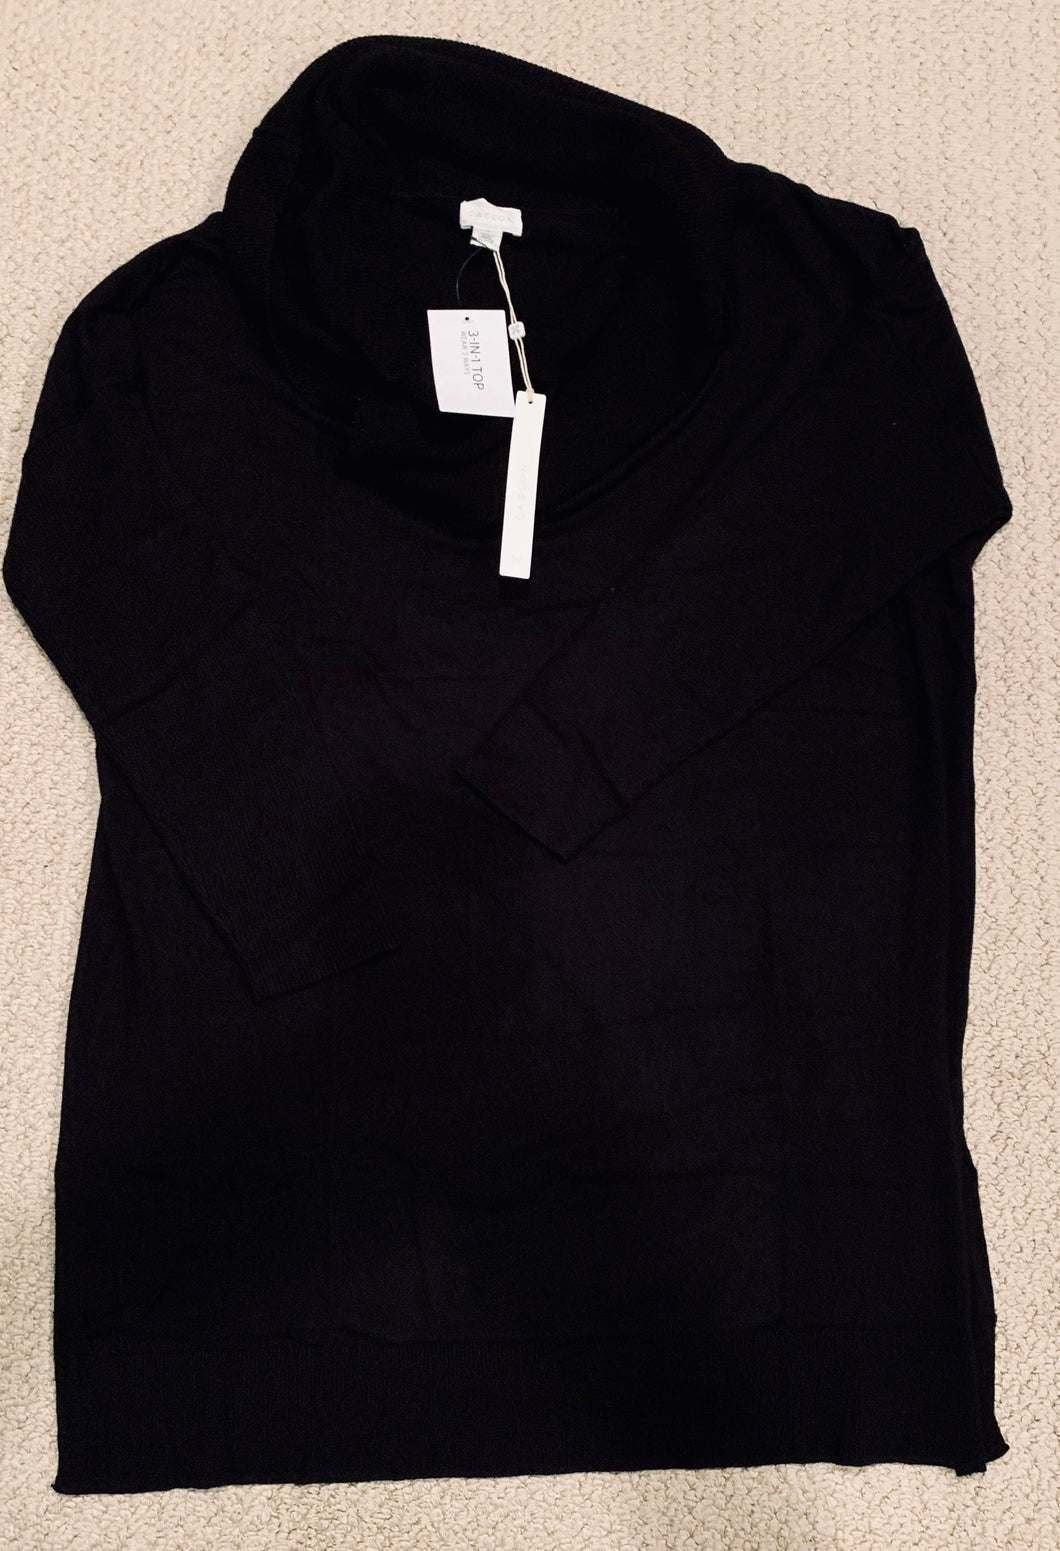 Caslon Cowl Neck Tunic Sweater - Black - Size 1X - New with tags